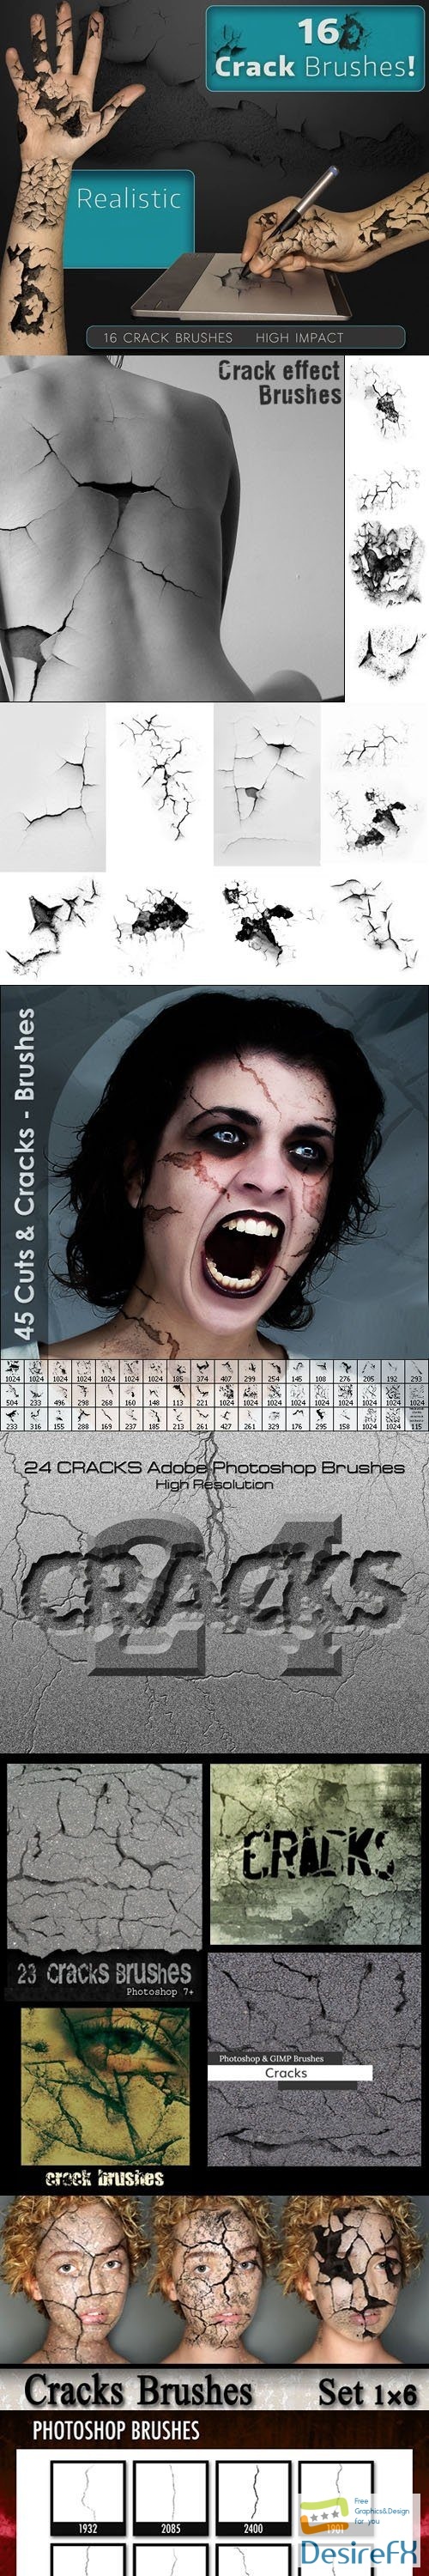 180+ Pretty Cuts and Cracks Brushes for Photoshop & Gimp